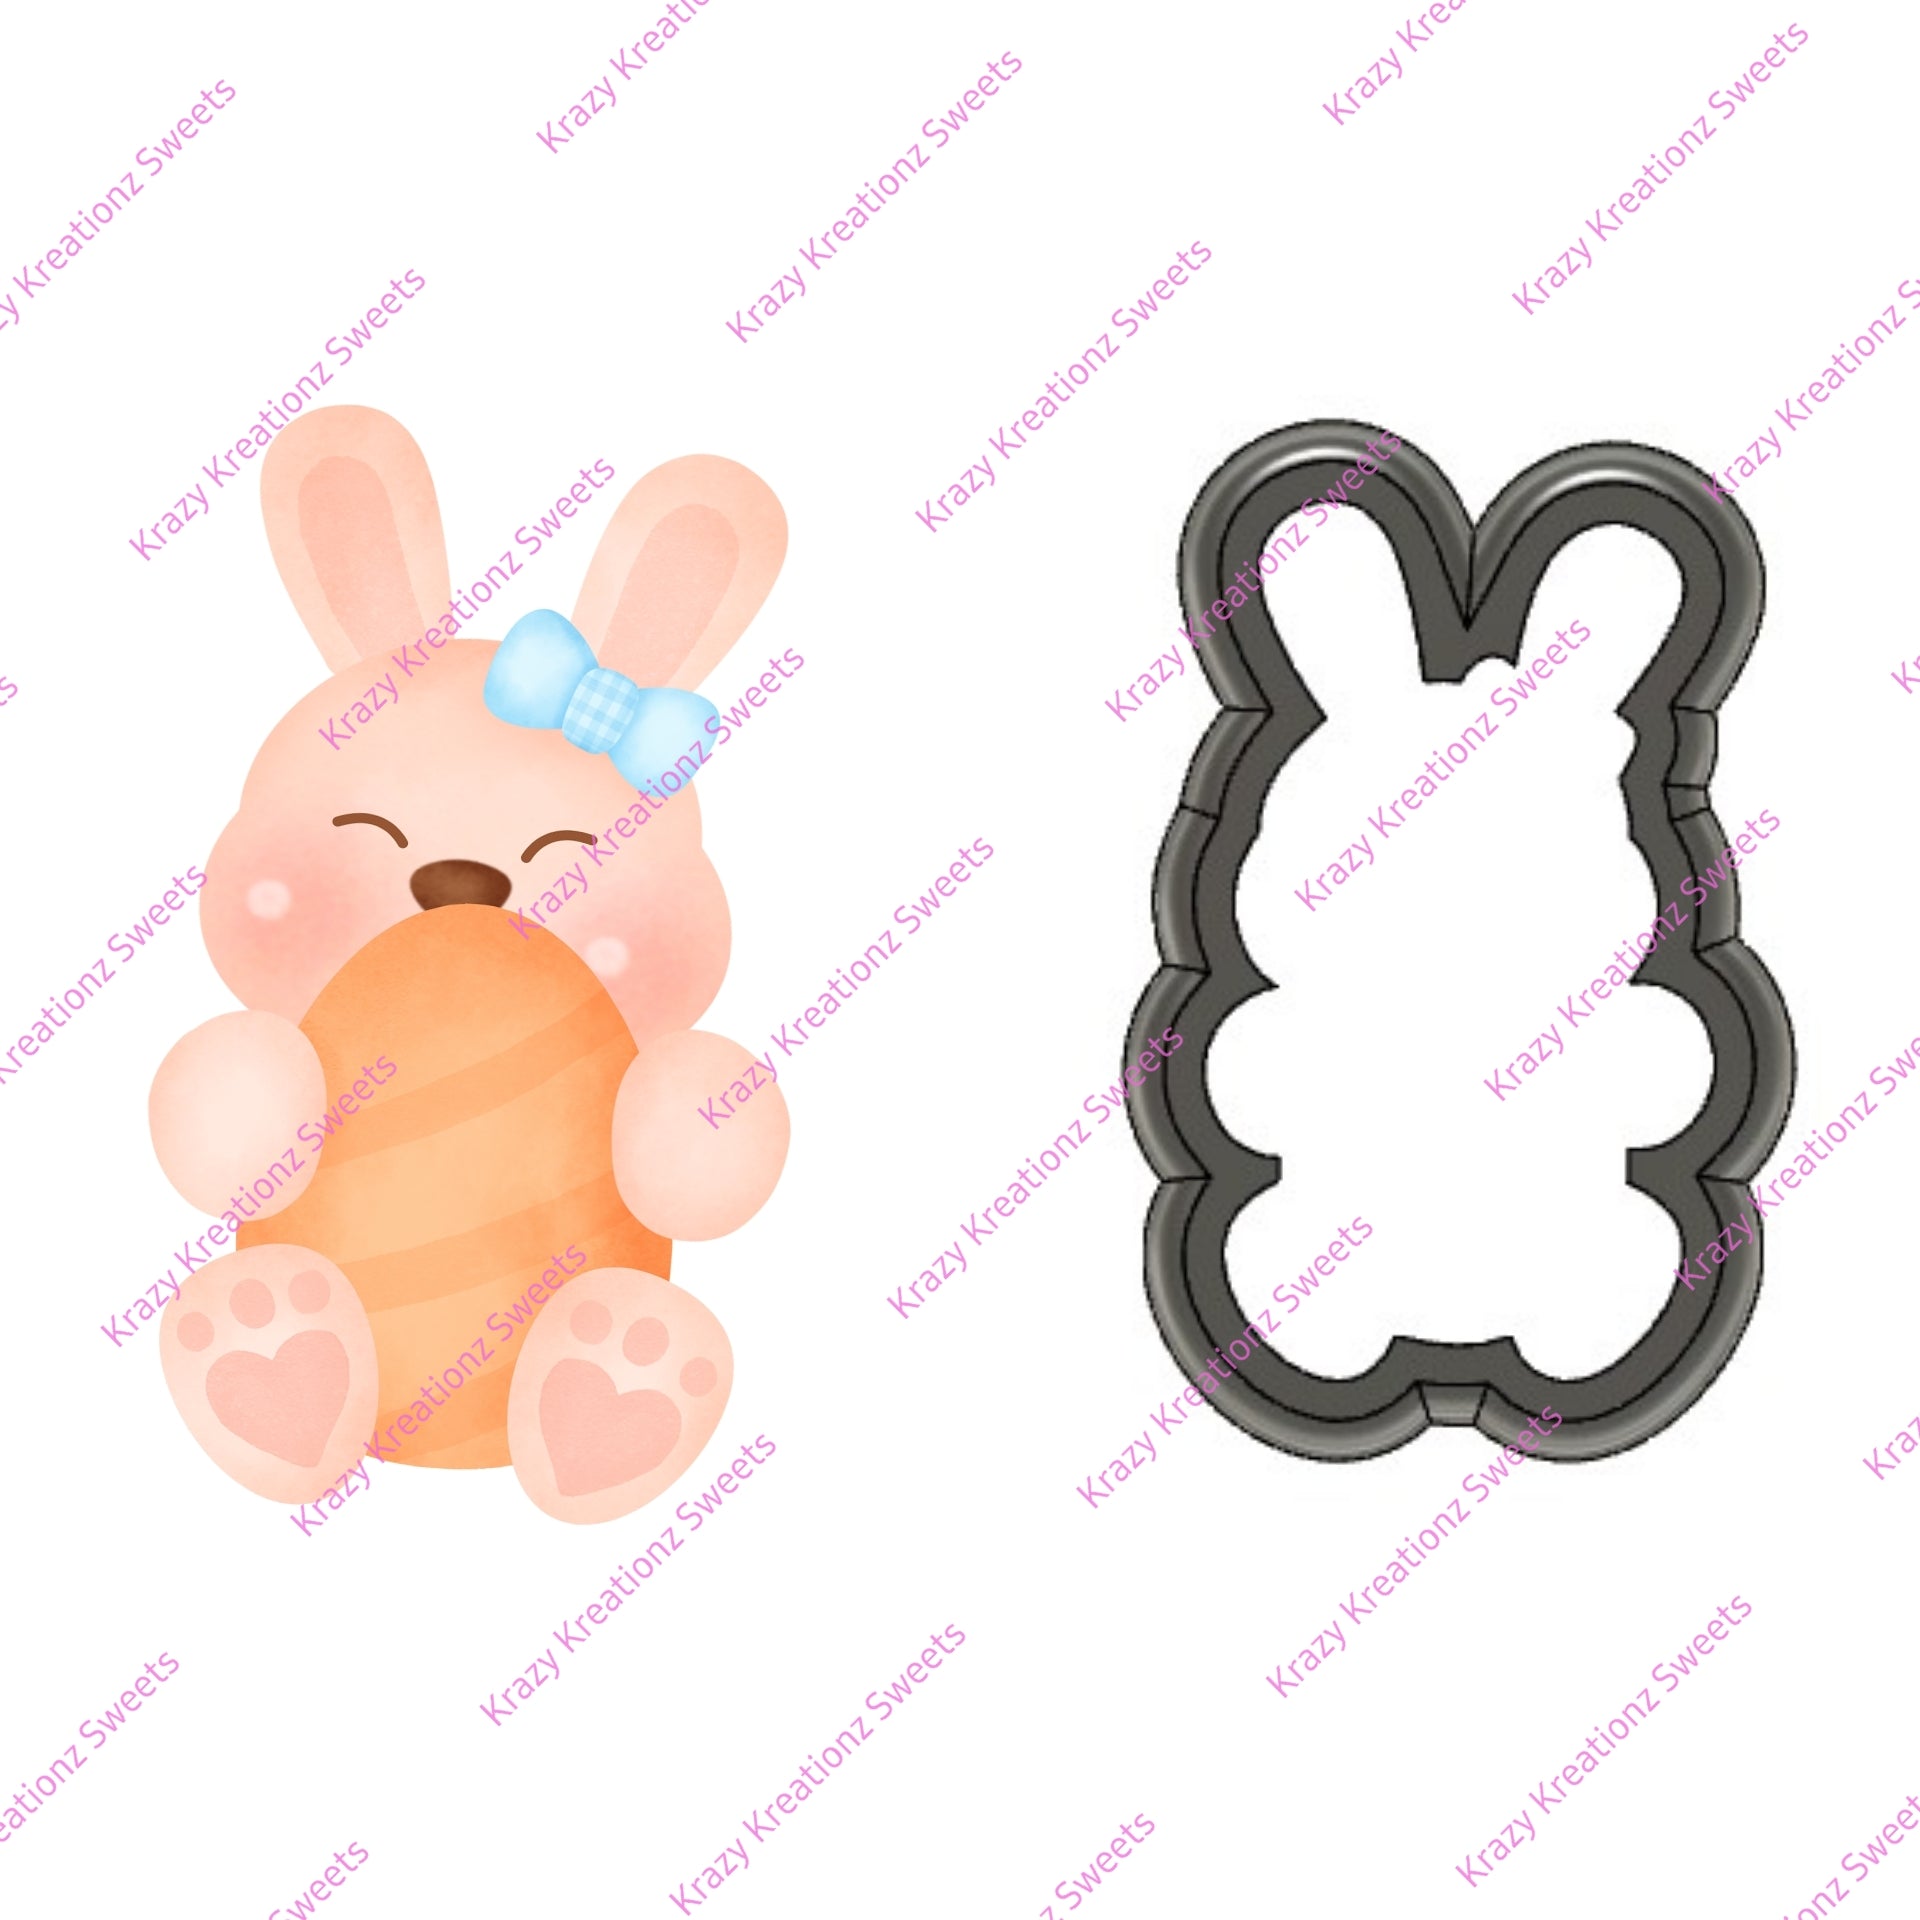 Rabbit Holding Egg Cookie Cutter